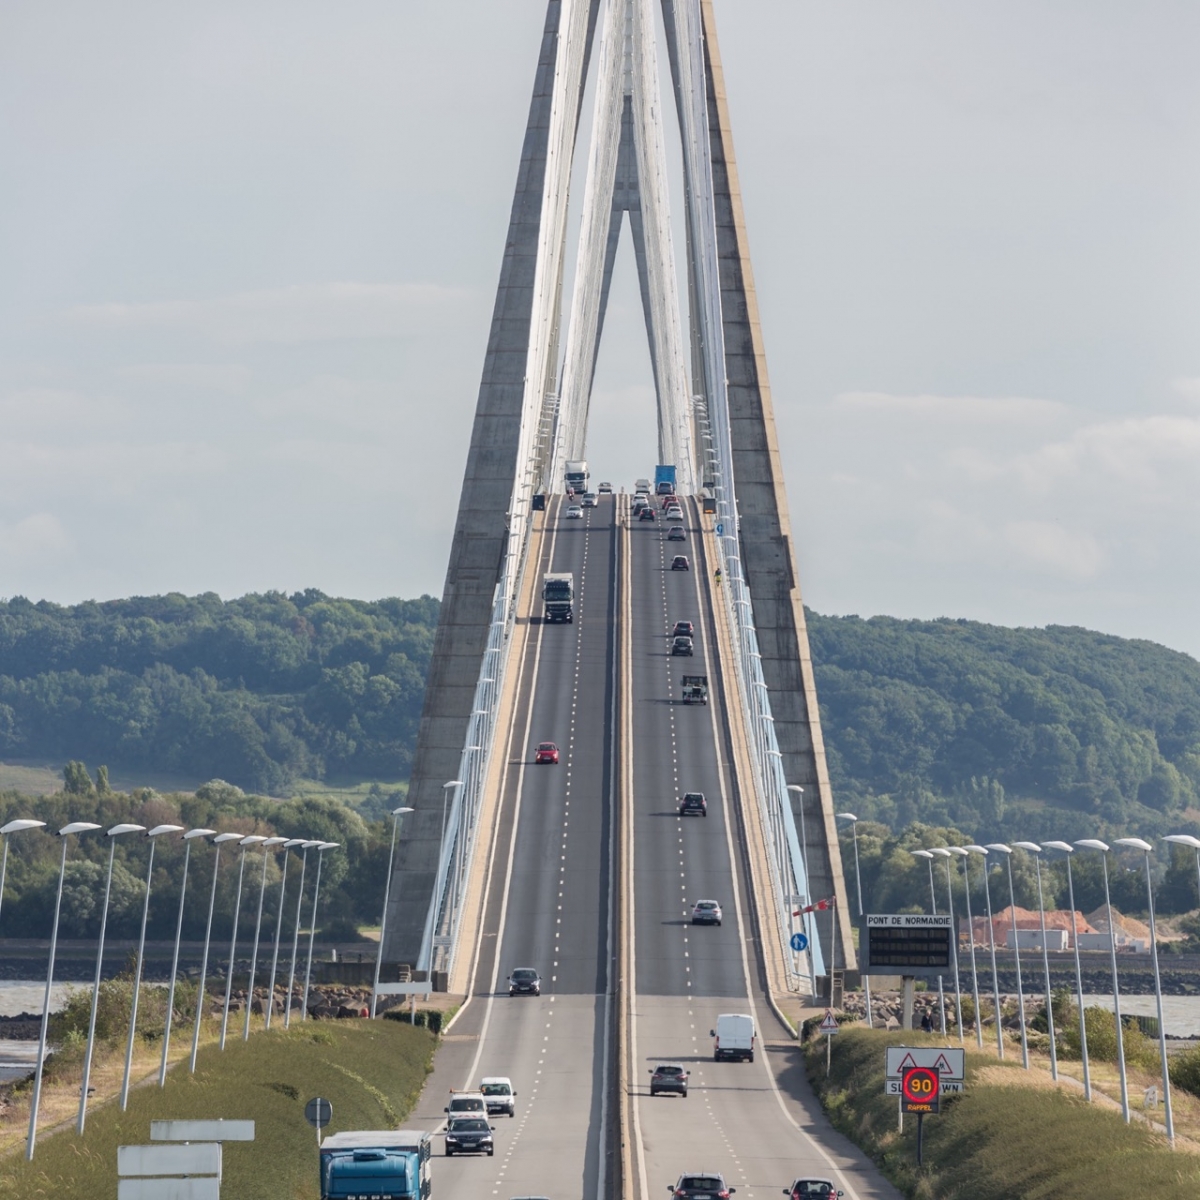 Traffic at Pont De Normandy near Le Havre in France